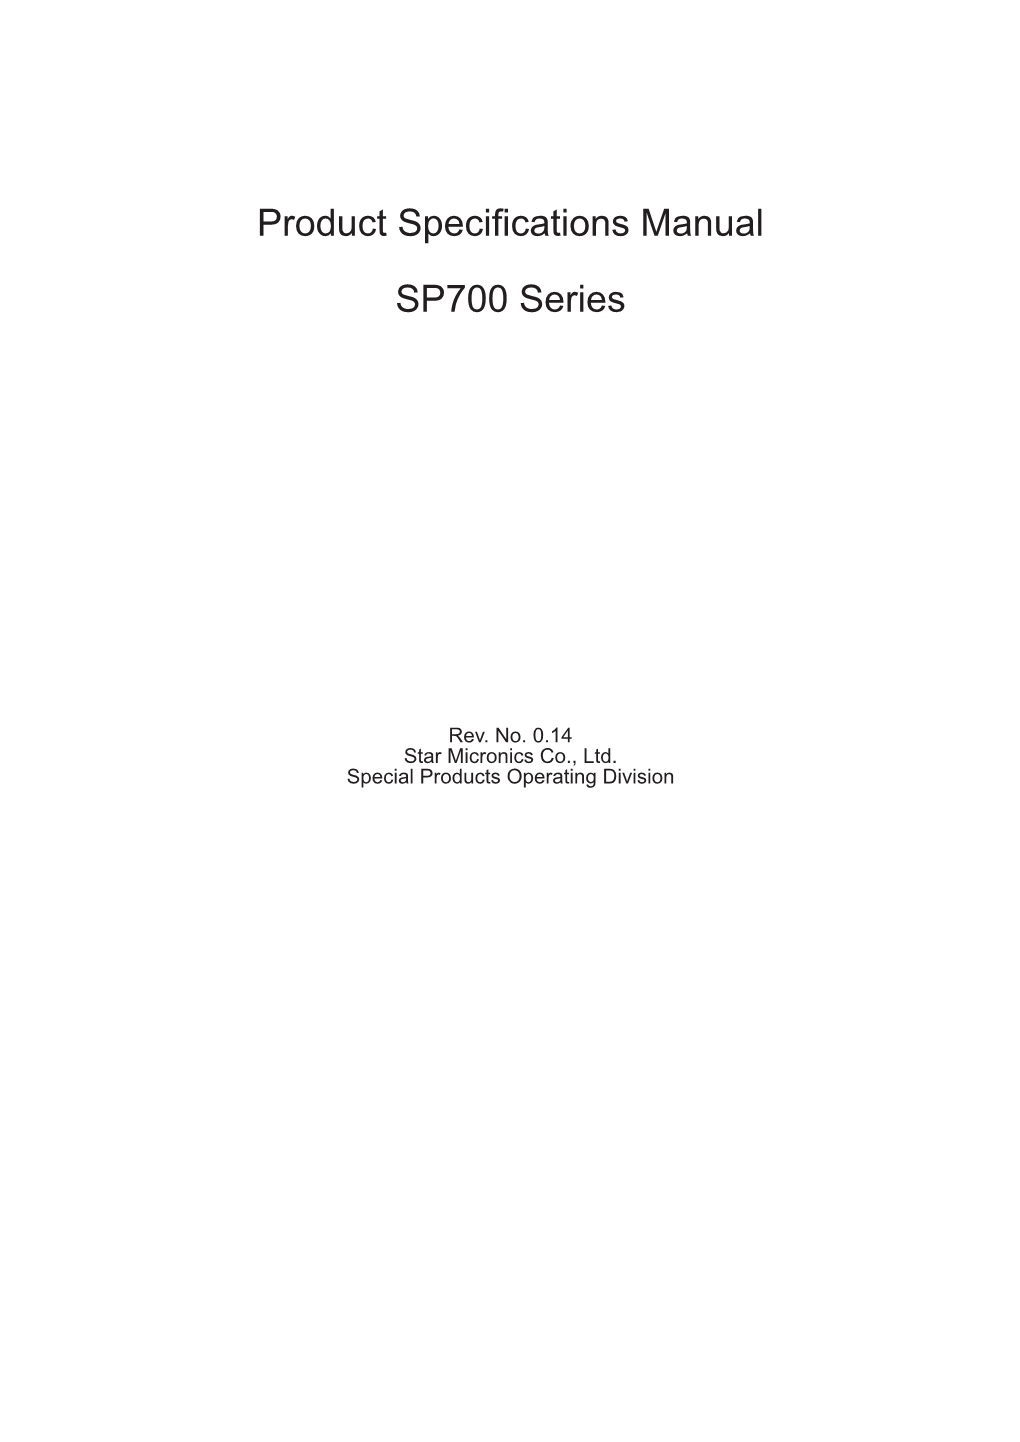 SP700 Product Specifications